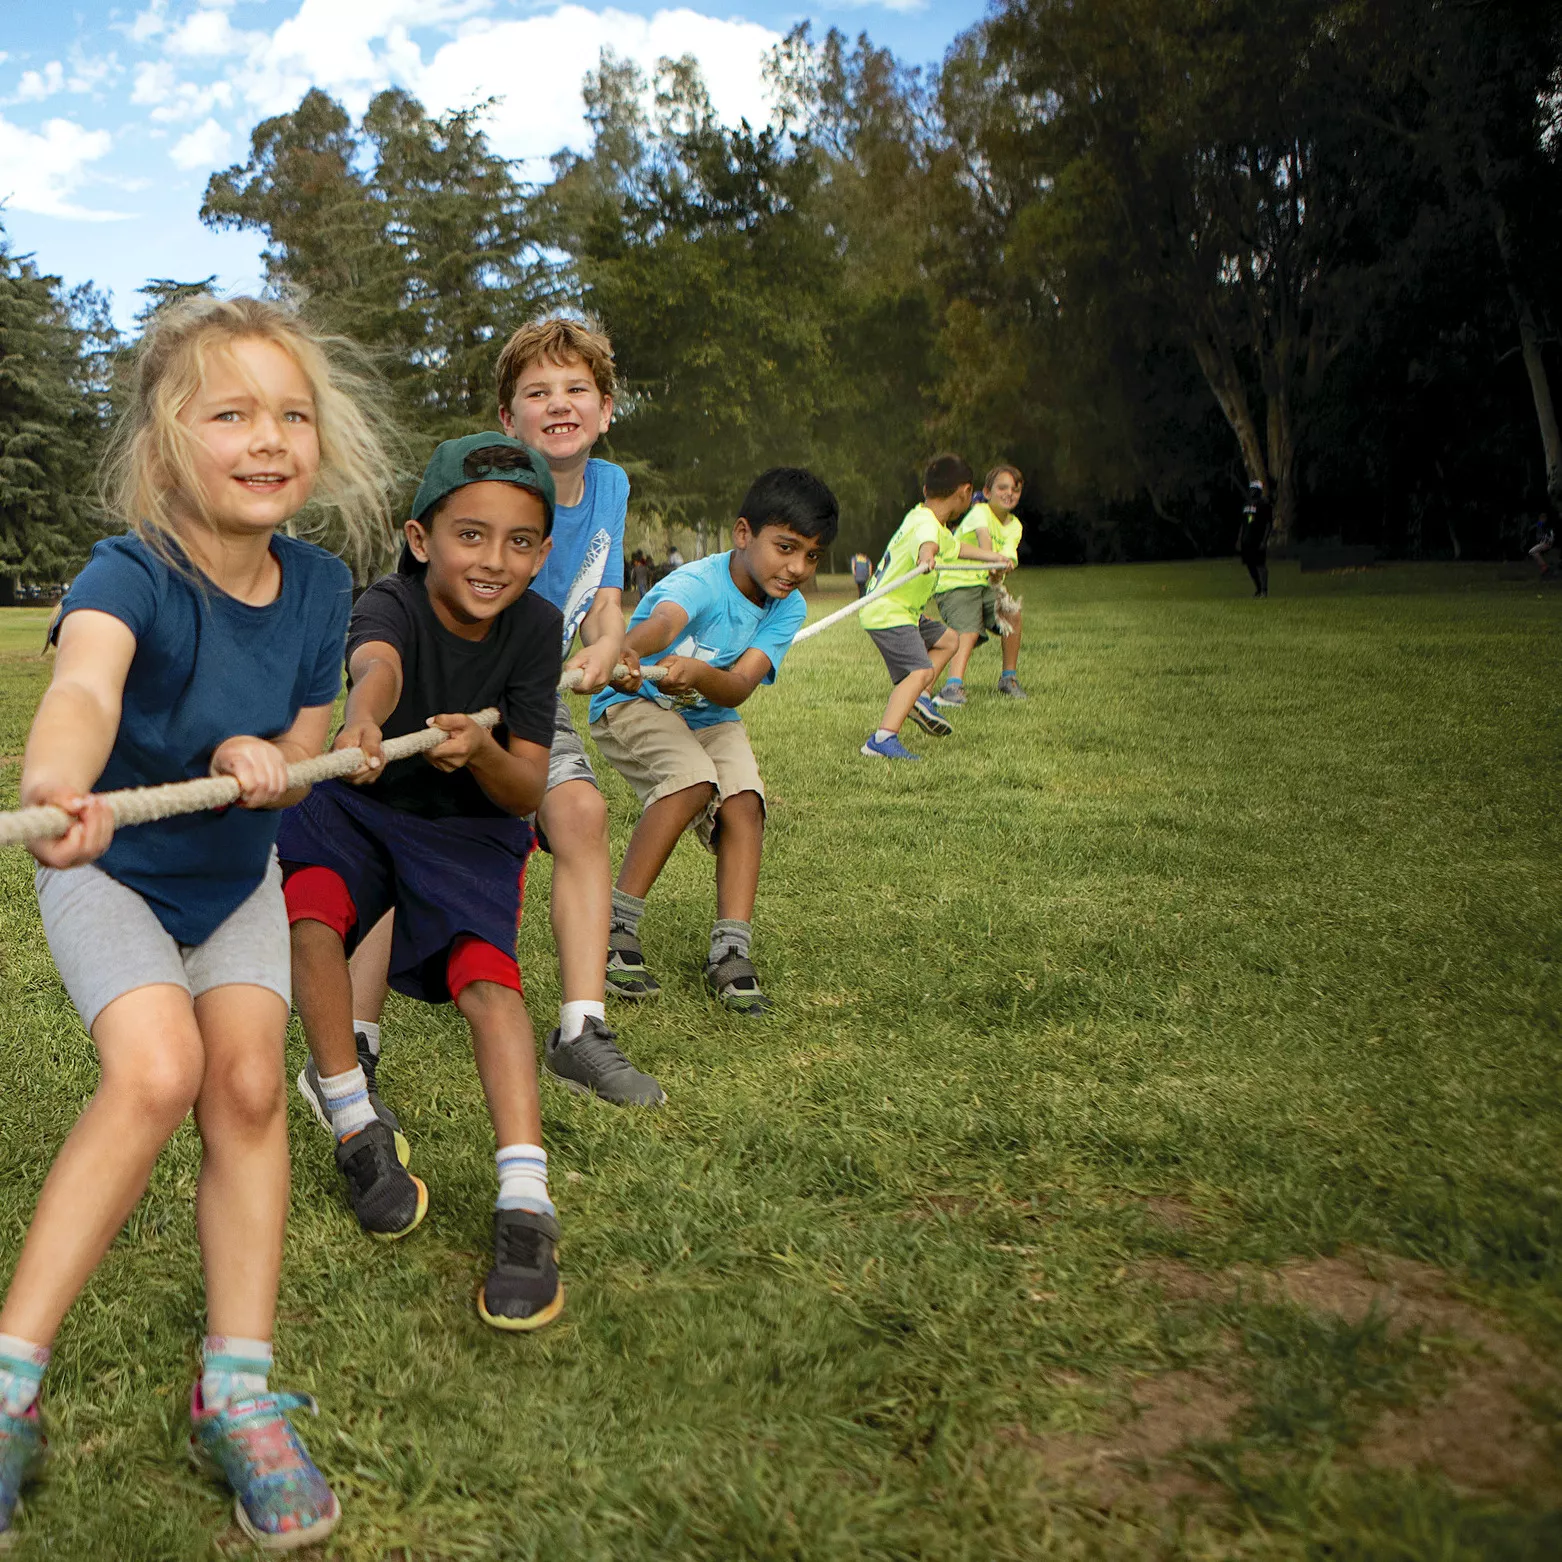 A group of kids pull on a rope in a game of tug-of-war